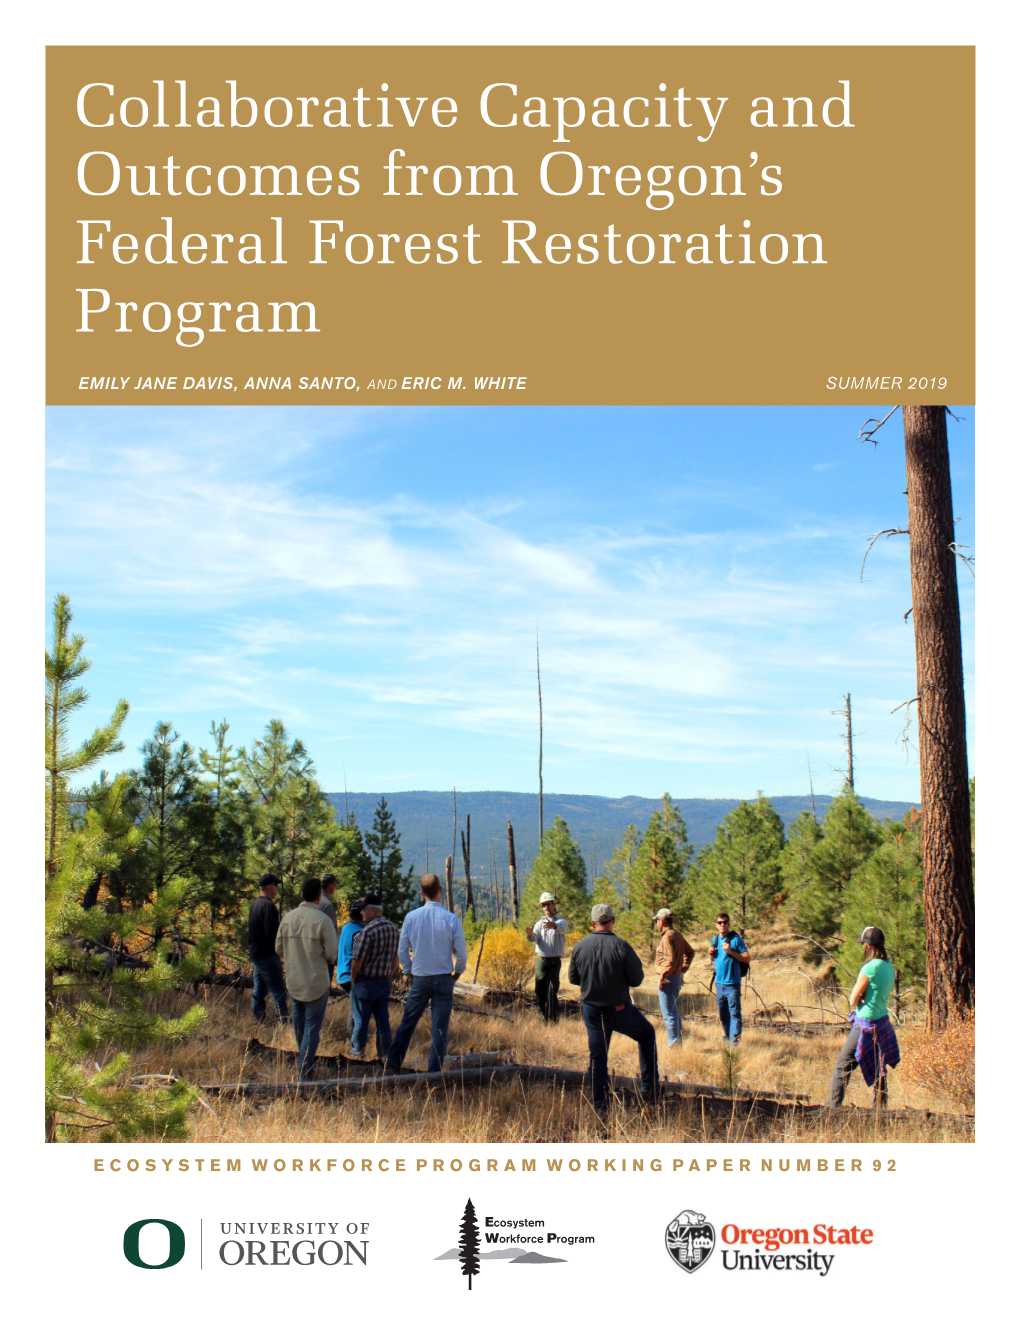 Collaborative Capacity and Outcomes from Oregon's Federal Forest